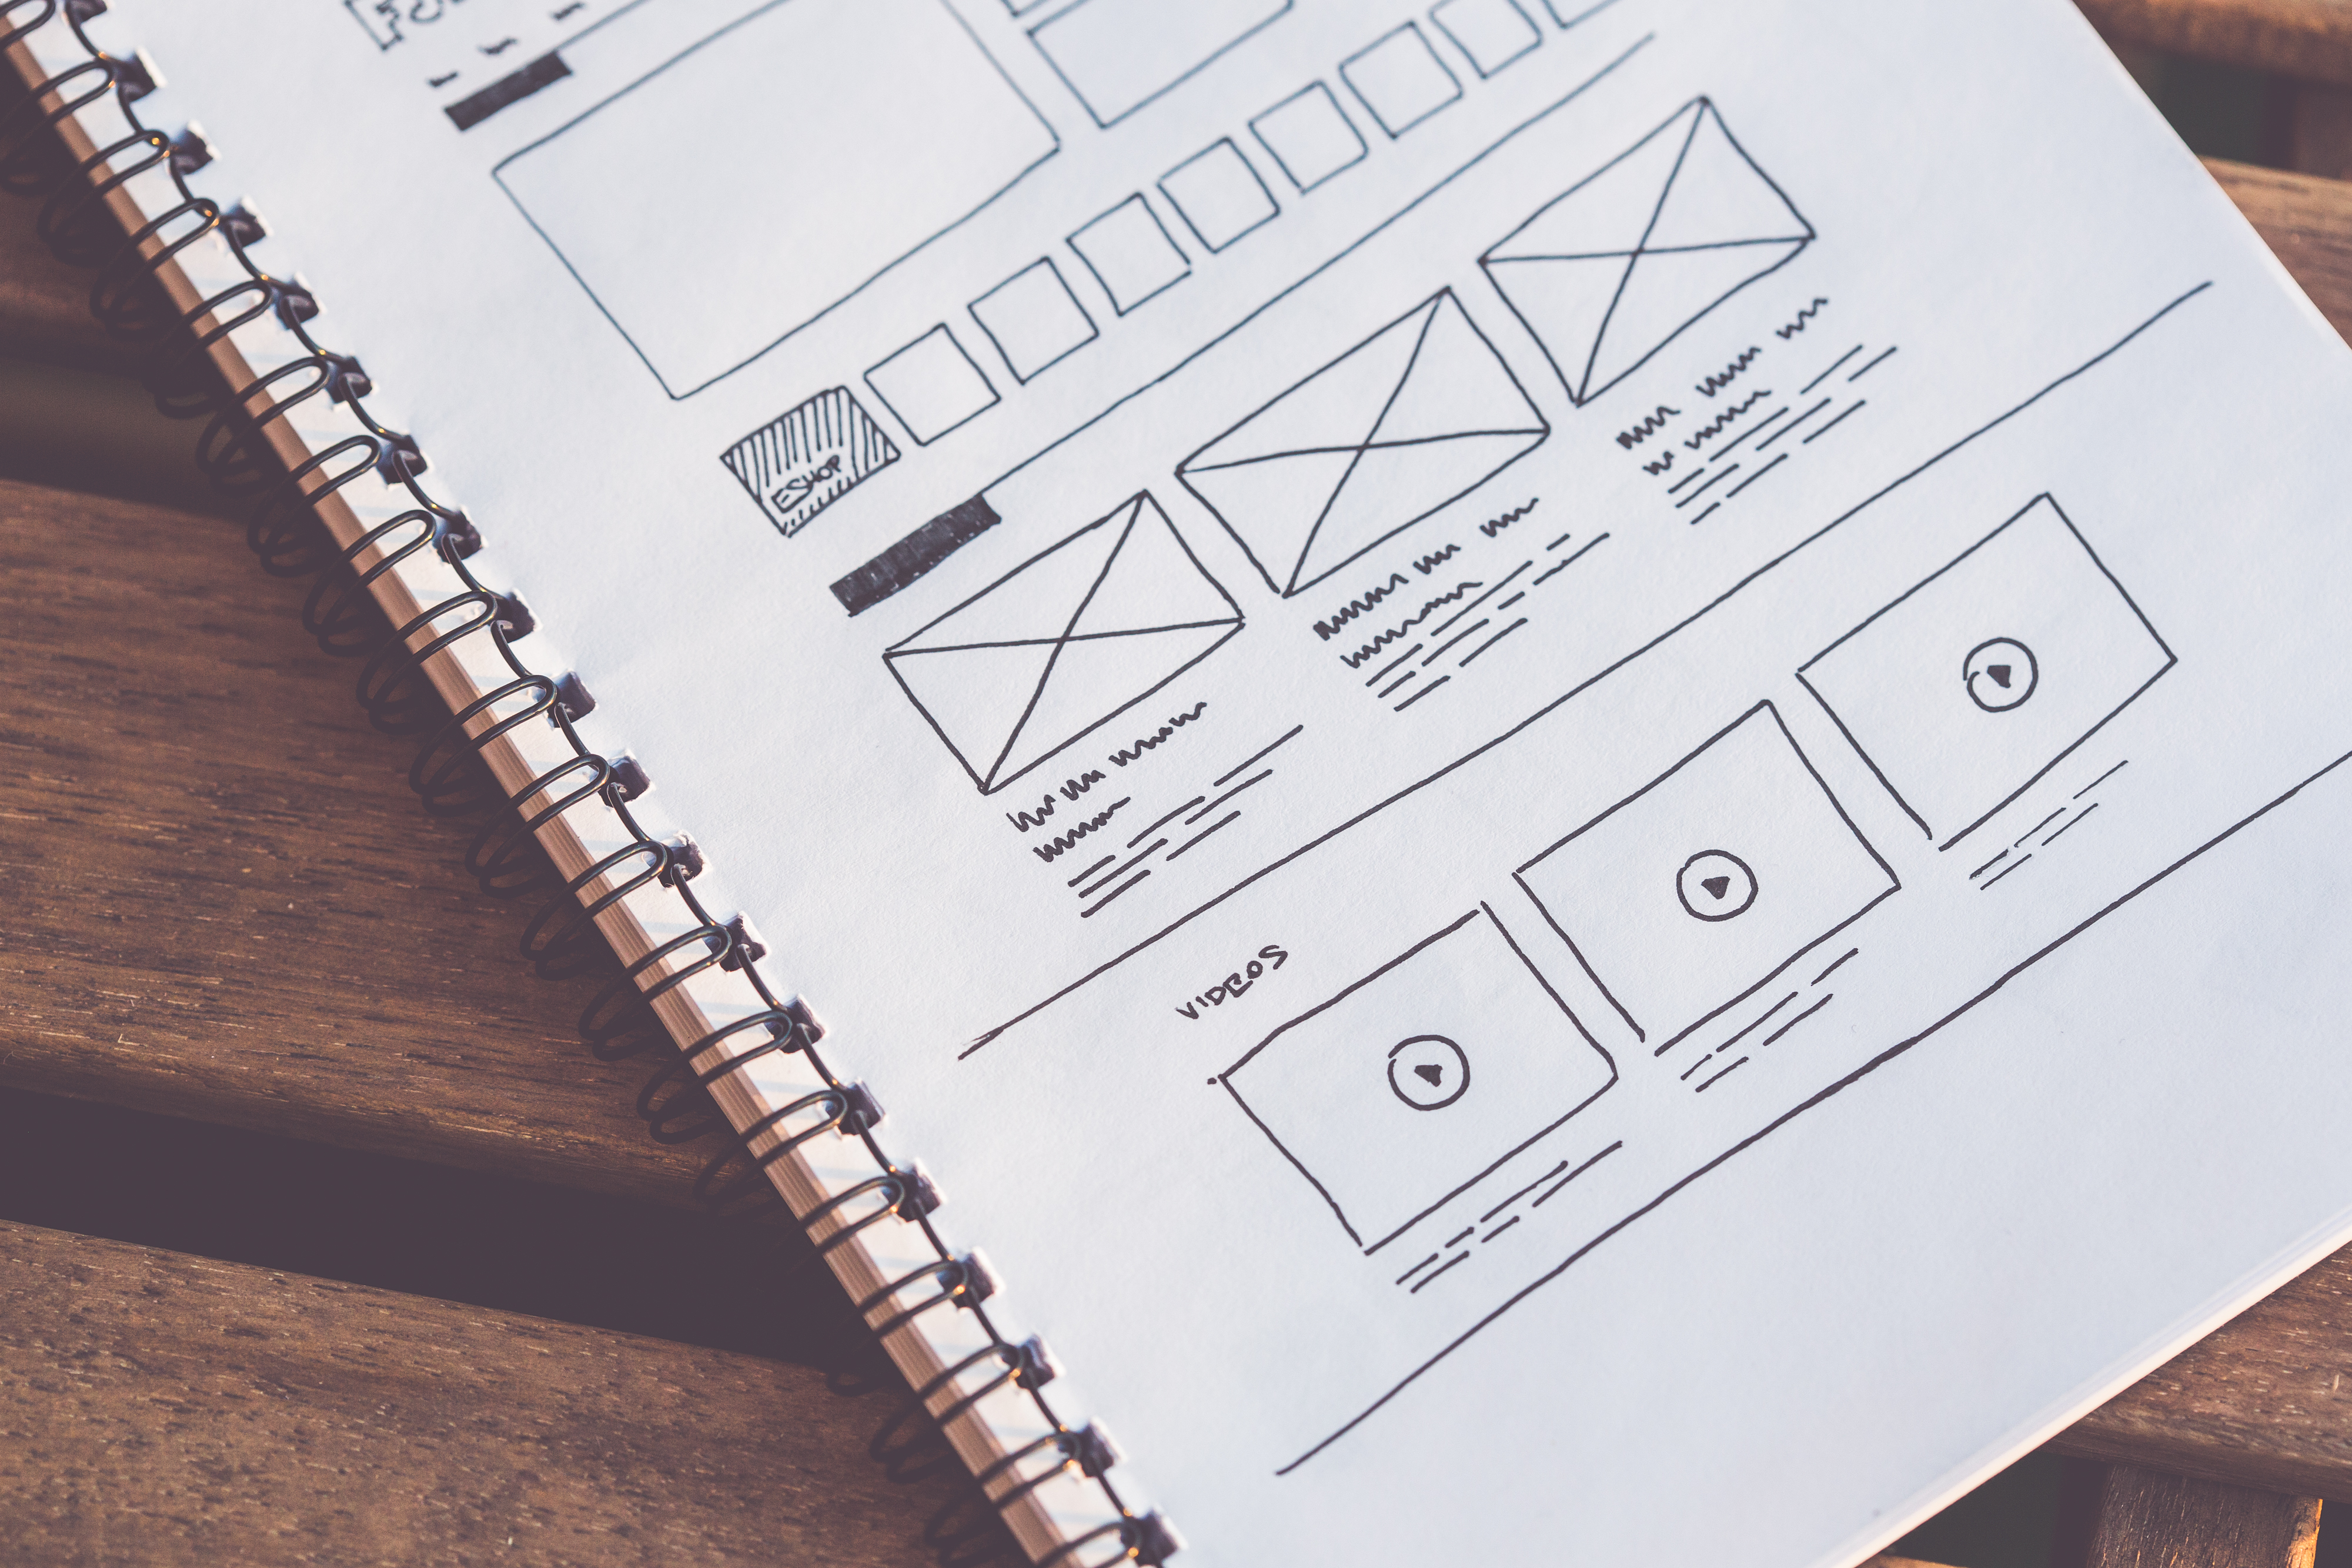 startup-website-layout-wireframes-ideas-sketched-on-paper-picjumbo-com